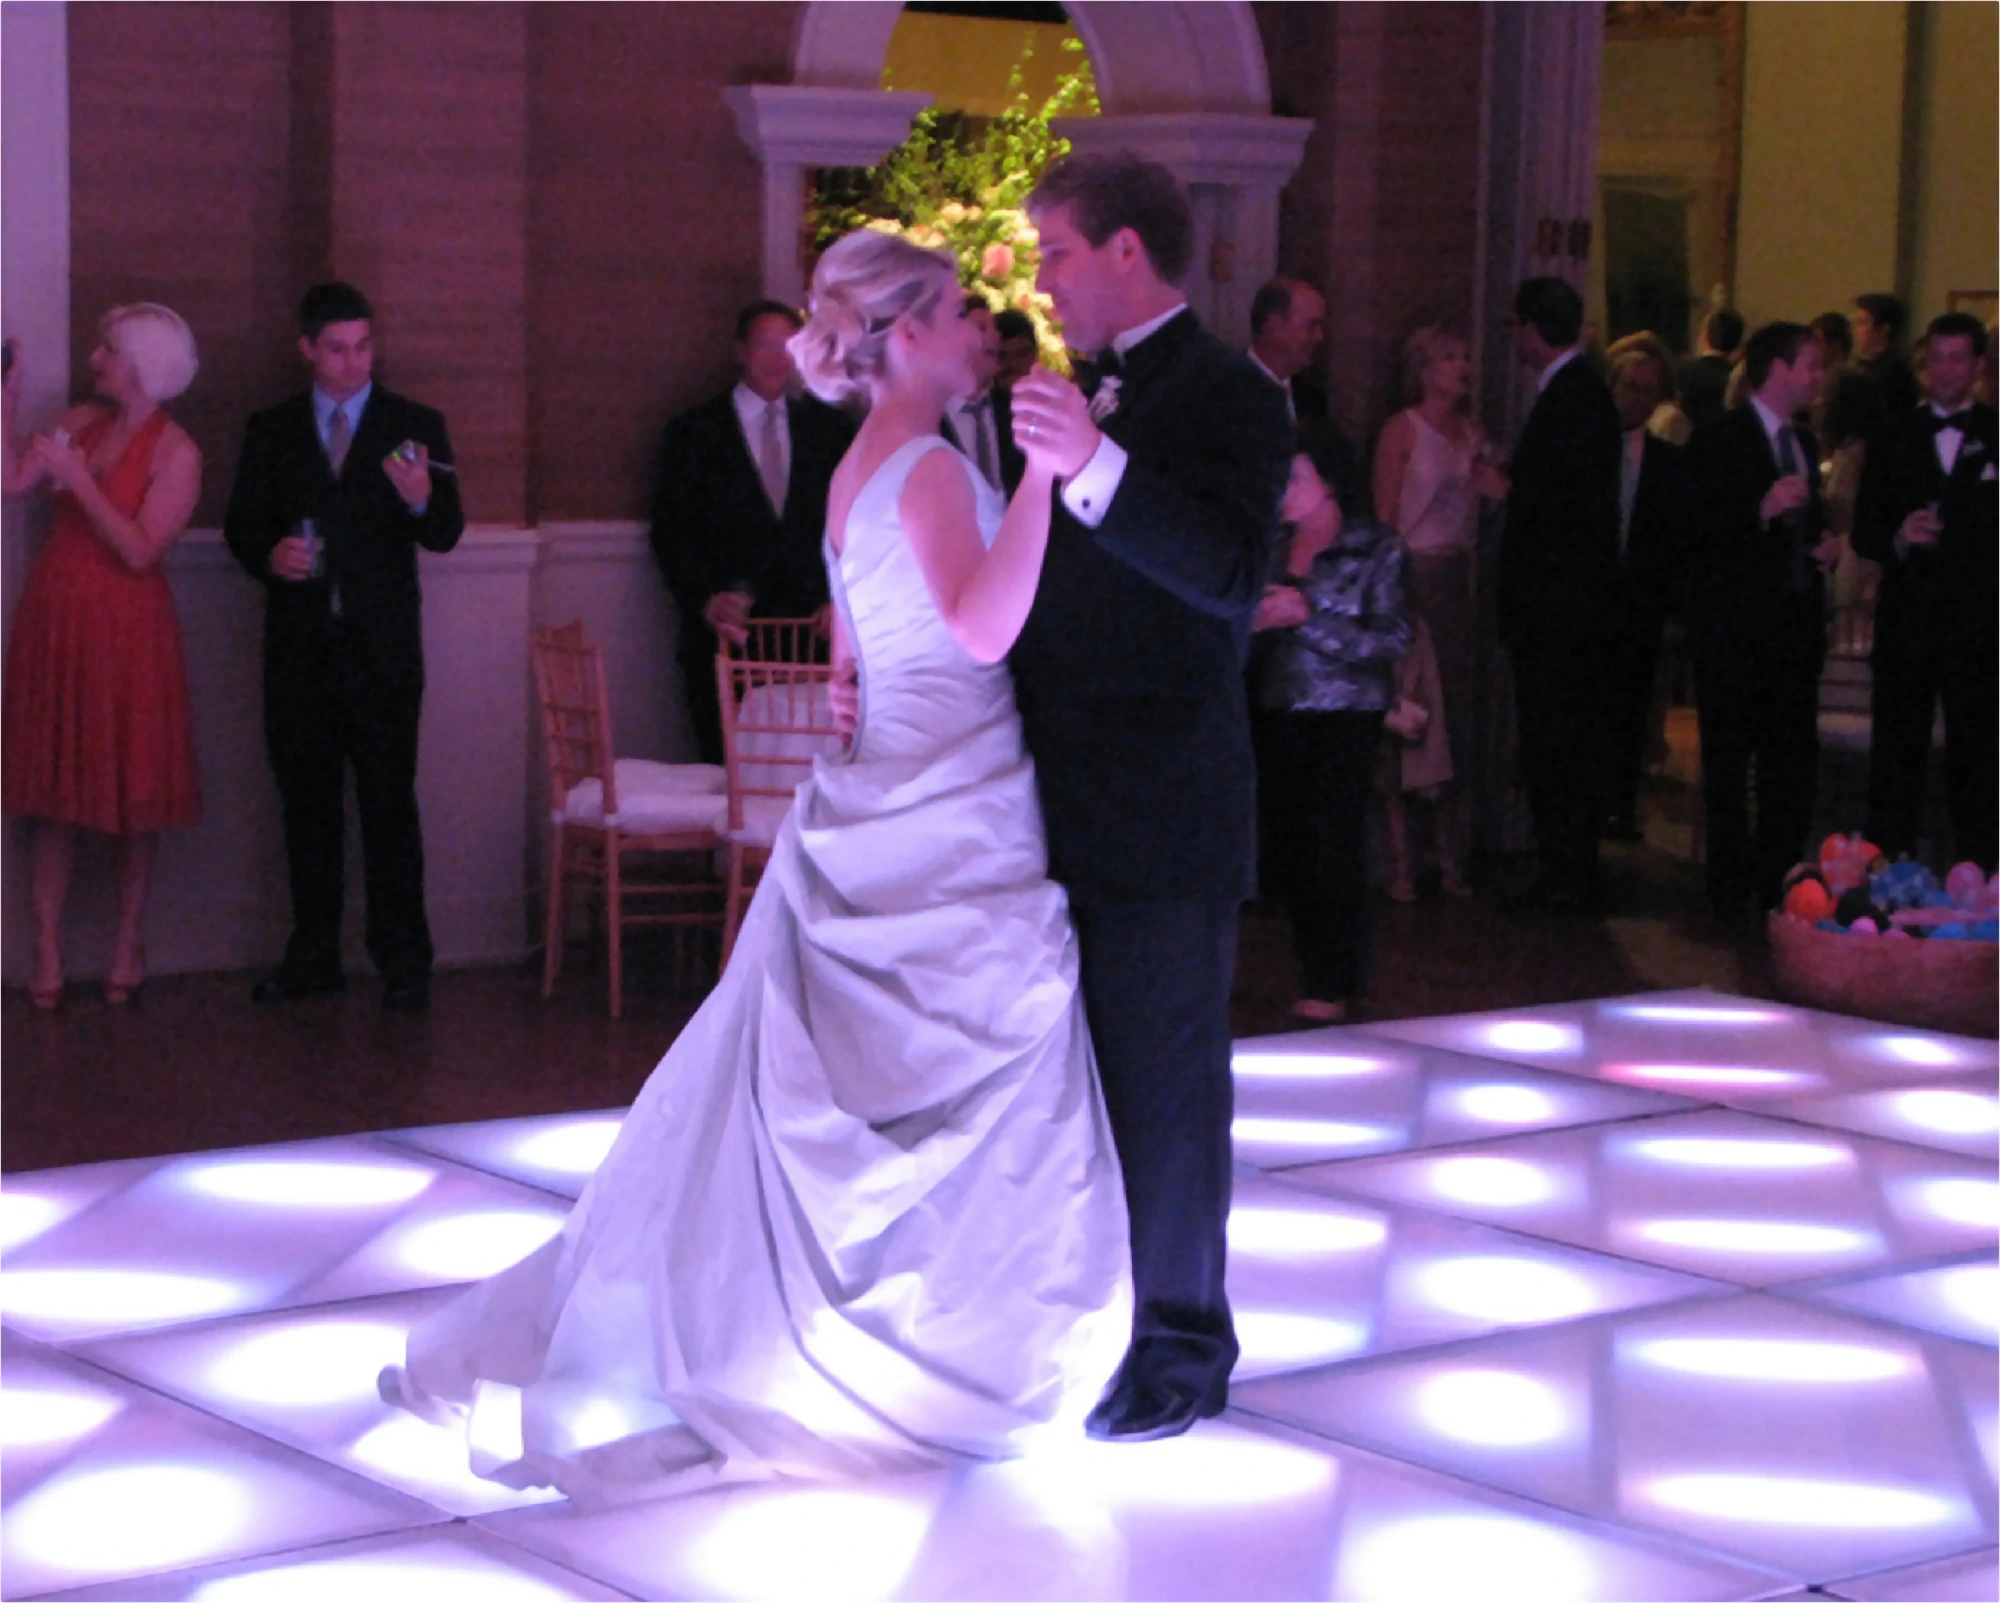 Large, square, lighted dance floor in white with bride and father dancing.